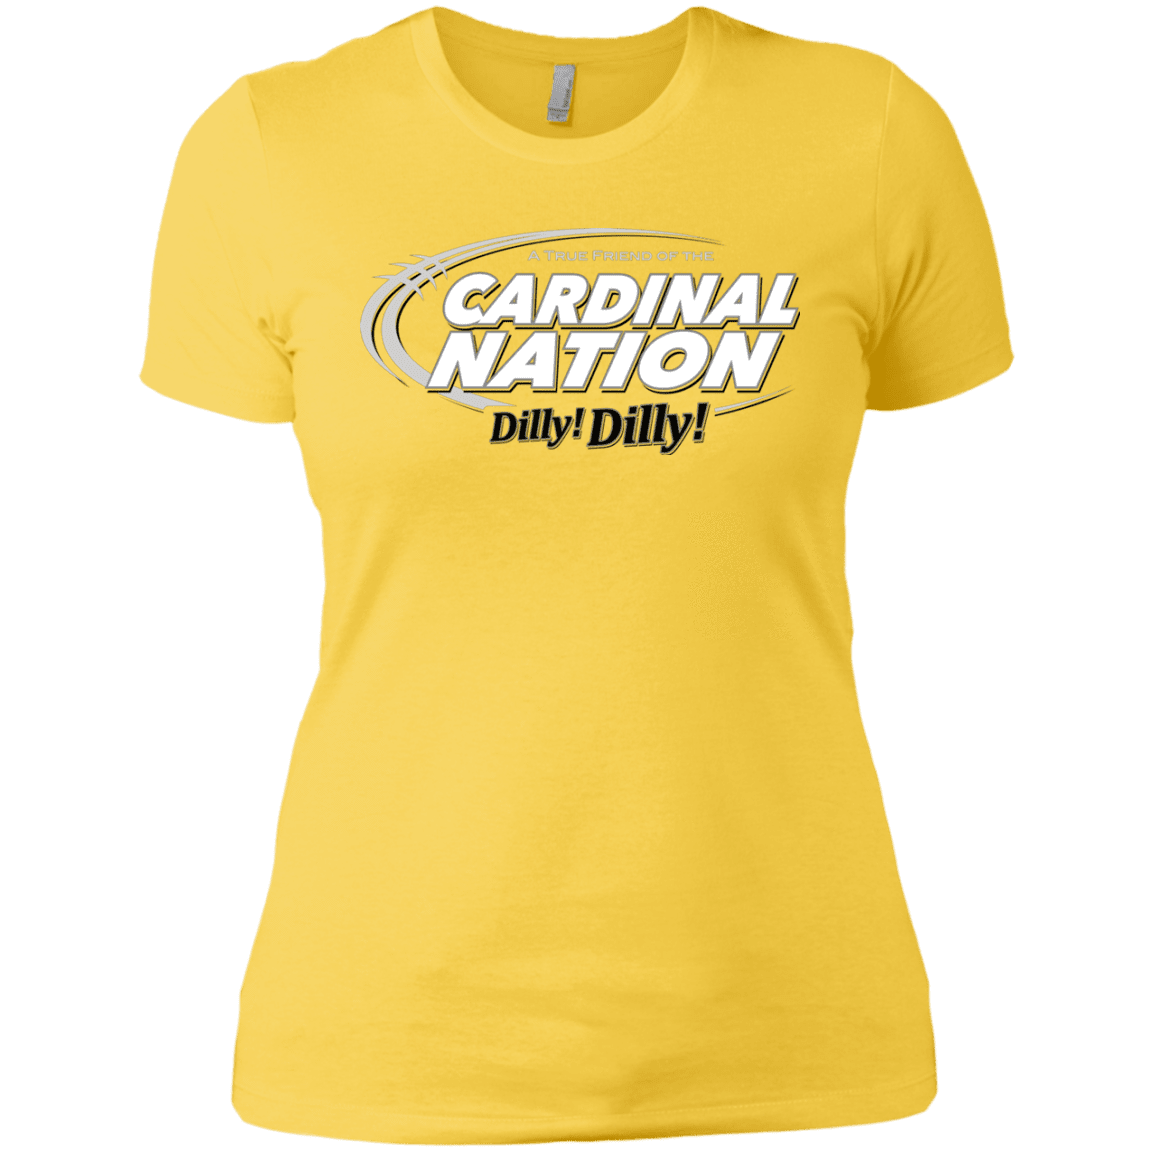 T-Shirts Vibrant Yellow / X-Small Stanford Dilly Dilly Women's Premium T-Shirt